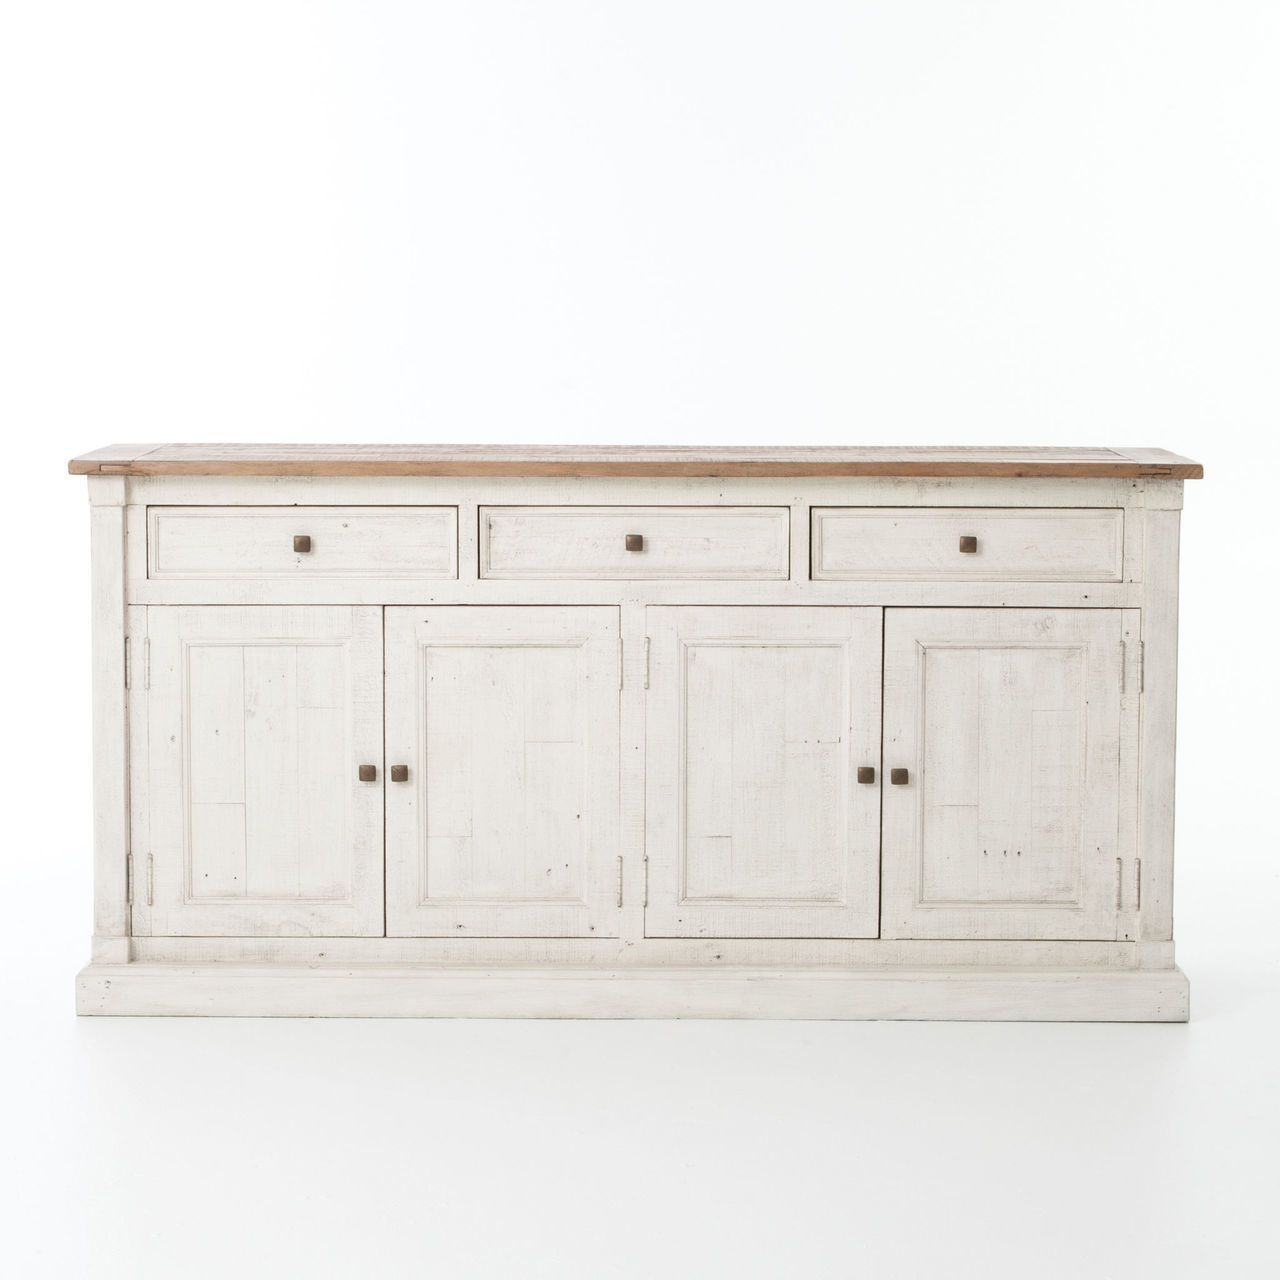 Cintra Reclaimed Wood White Sideboard Buffet | Dining Room Inside Payton Serving Sideboards (View 3 of 30)